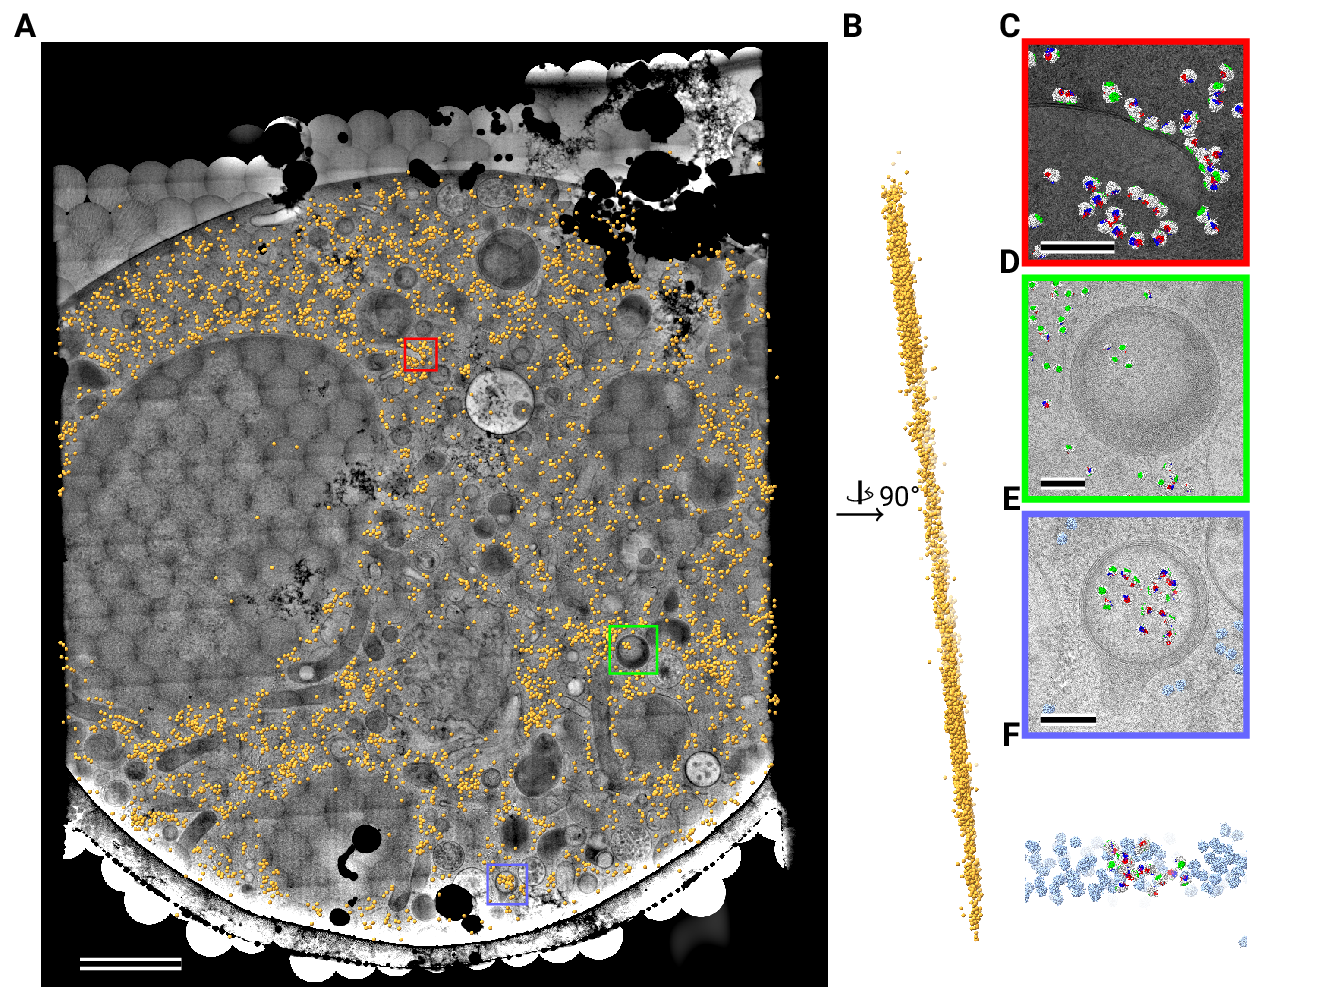 Figure 5: Template matching in lamella imaged using the DeCo-LACE approach at fringe-free focus (A) Montage of Lamella_\textrm{FFF} 4 overlaid with detected targets colored in orange. Scalebar corresponds to 1 μm. (B) Side view of detected targets in the lamella, such that the direction of the electron beam is horizontal. (C-E) Magnified area of panel A showing rough ER with associated ribosomes (C) and ribosomes enclosed in a less electron dense inclusion in a granule (D,E). (F) Side view of panel E. Ribosomes are colored in white with the surface of the peptide exit tunnel colored in green and the A, P, and E sites colored in blue, purple, and red, respectively. Scalebar corresponds to 100 nm.